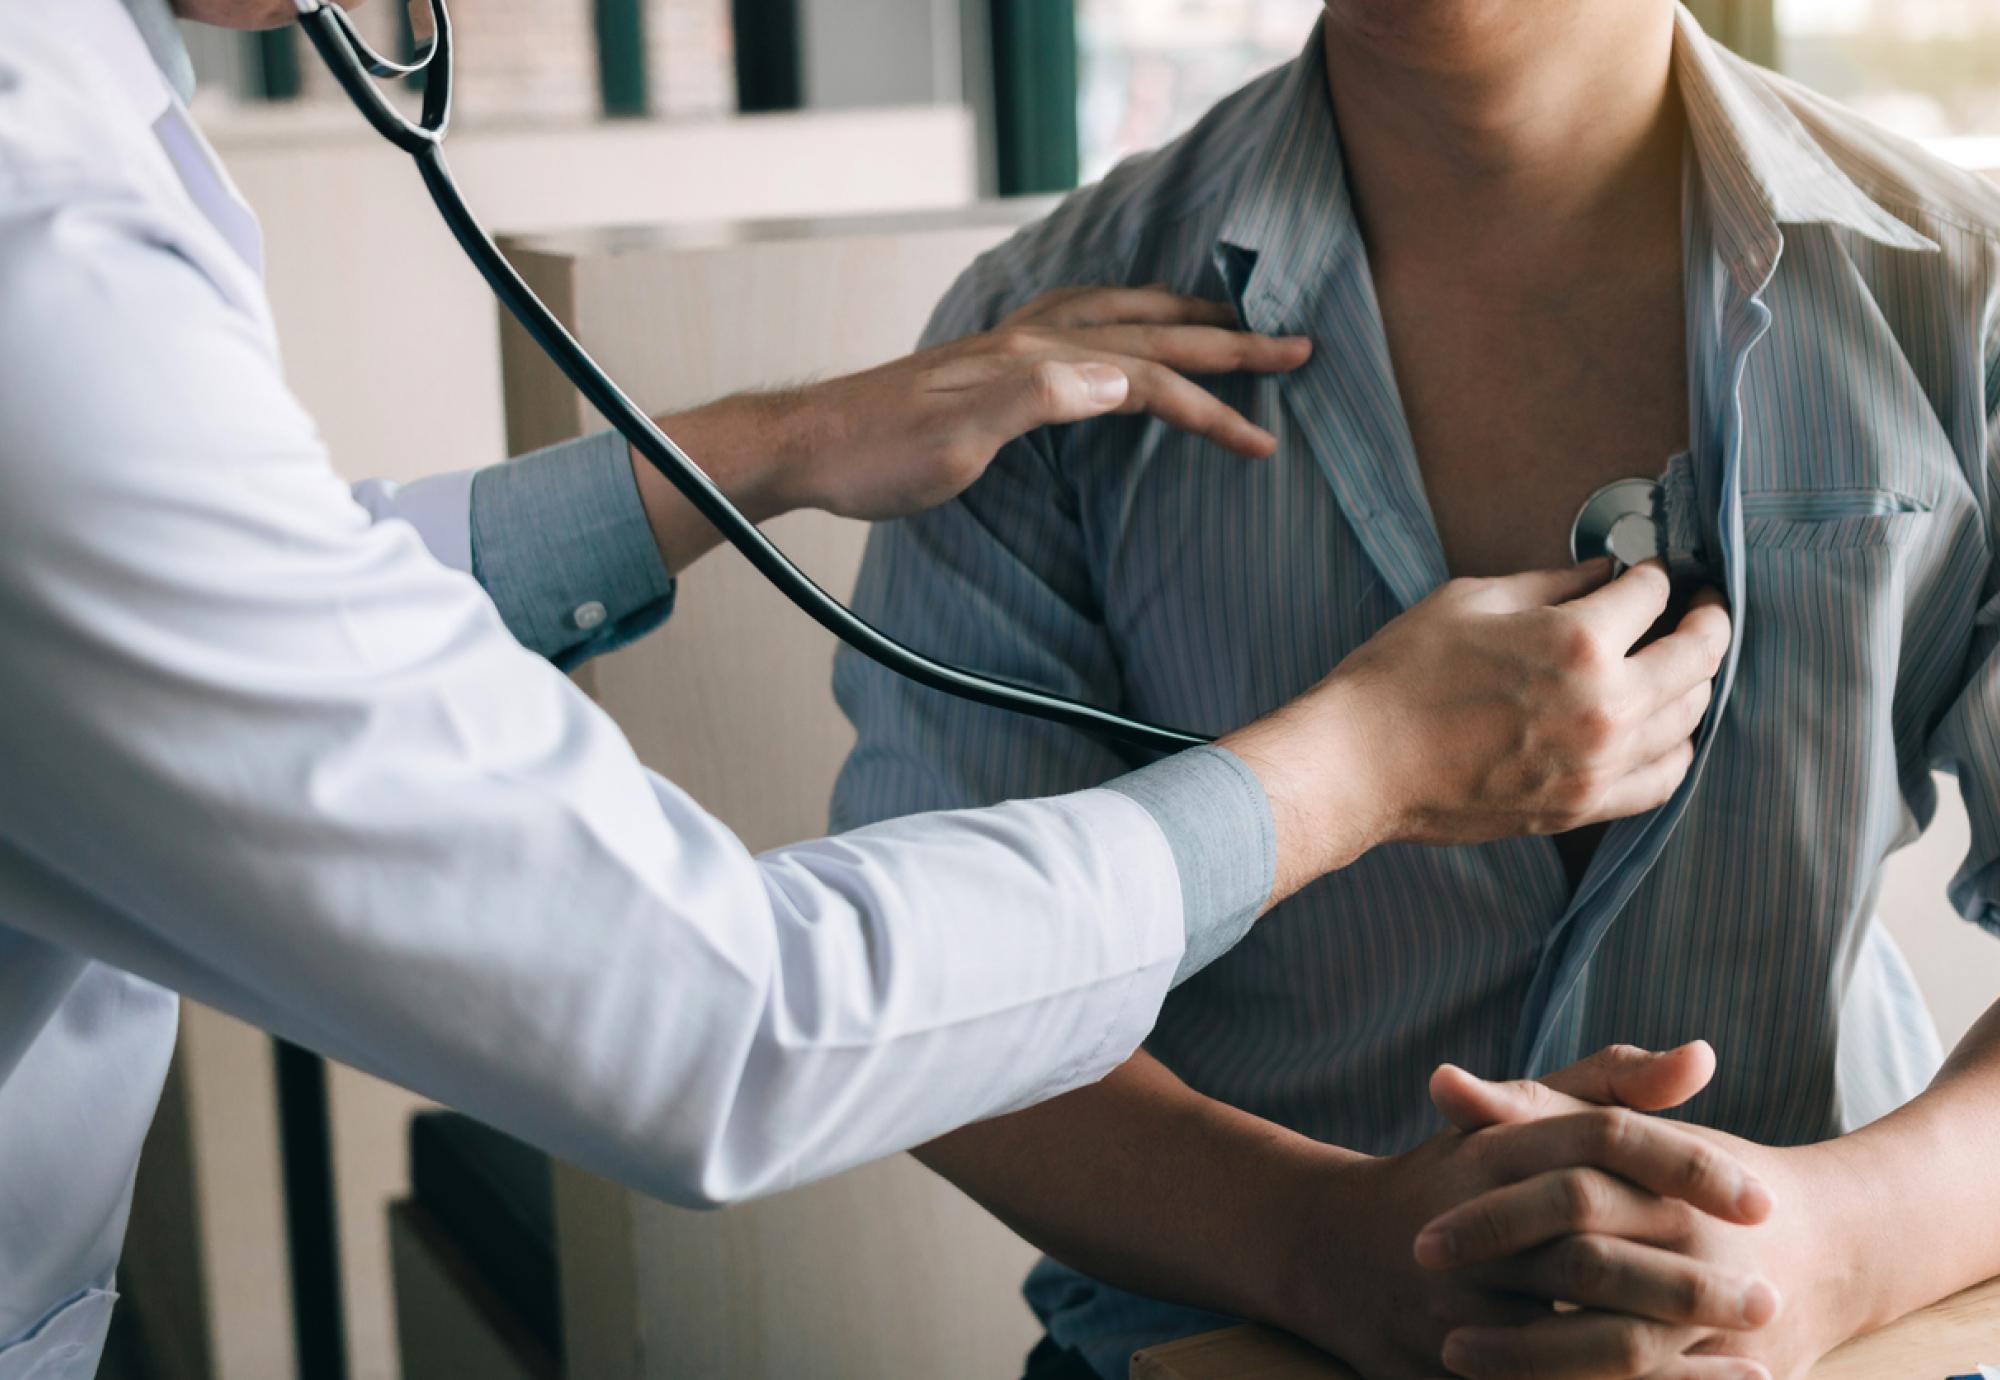 Doctor using stethoscope to check patient's heartbeat